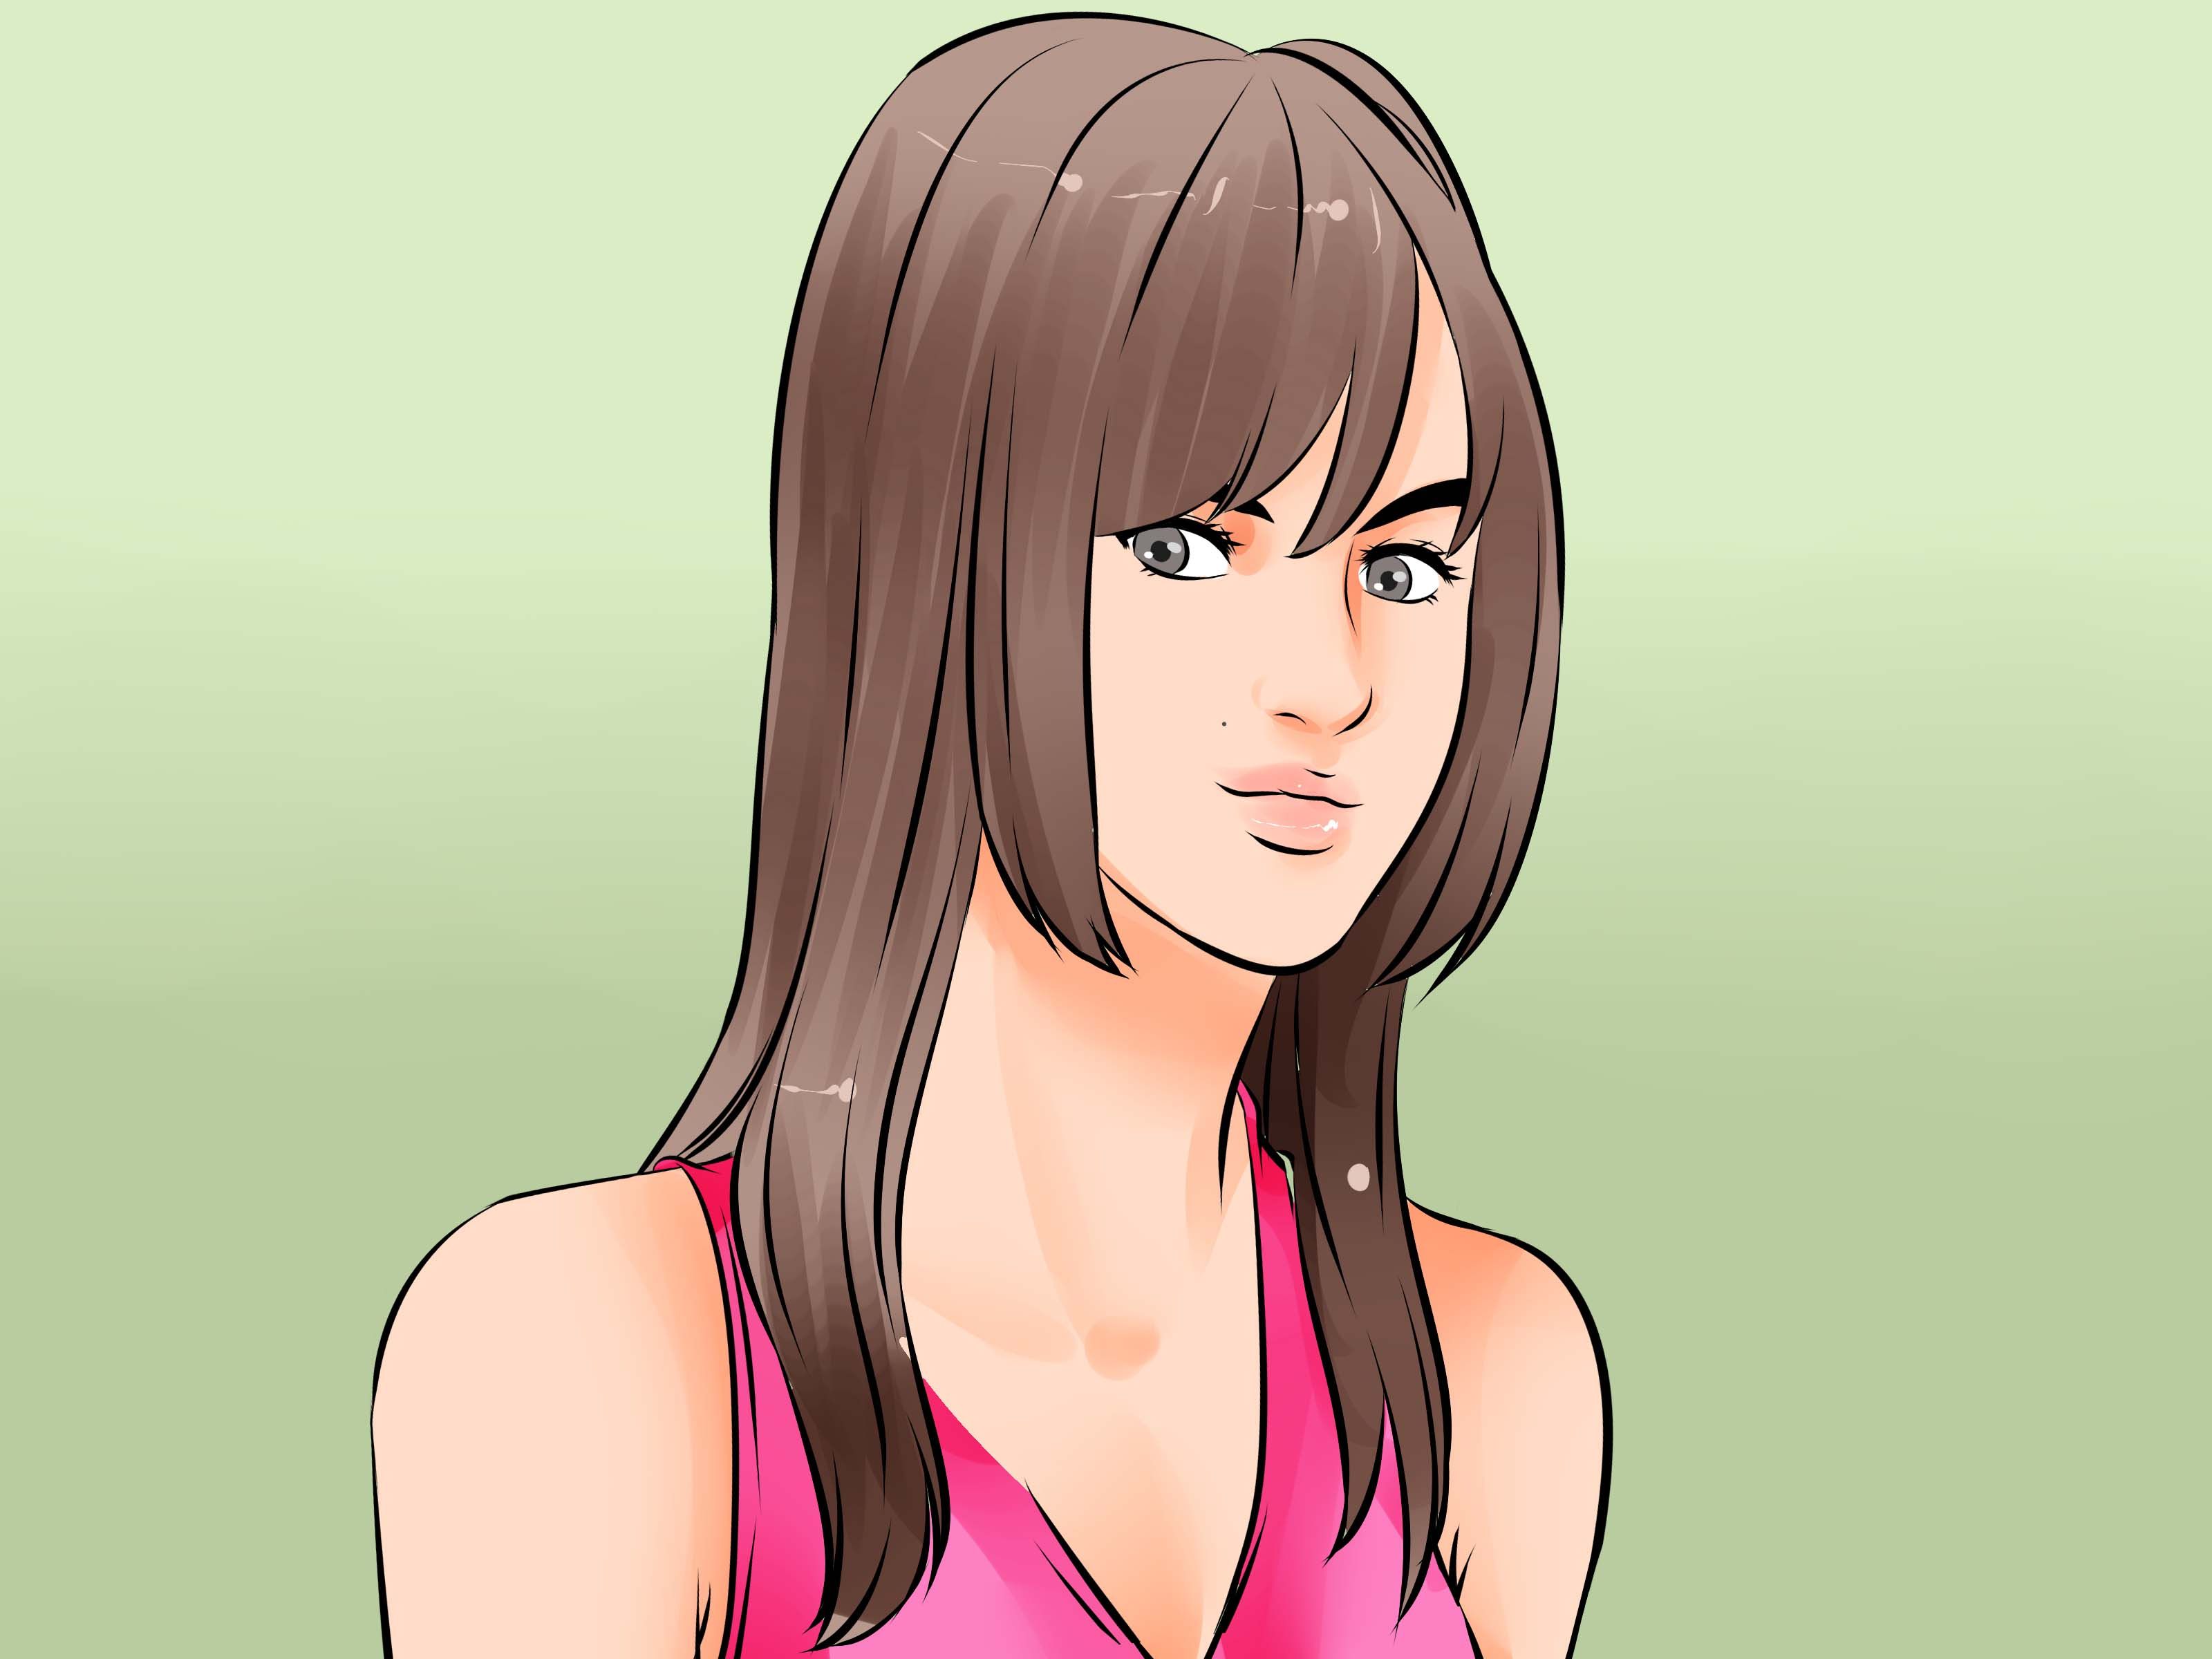 Latest Medium Hairstyles For Large Noses Regarding How To Hide Big Ears: 10 Steps (with Pictures) – Wikihow (Gallery 20 of 20)